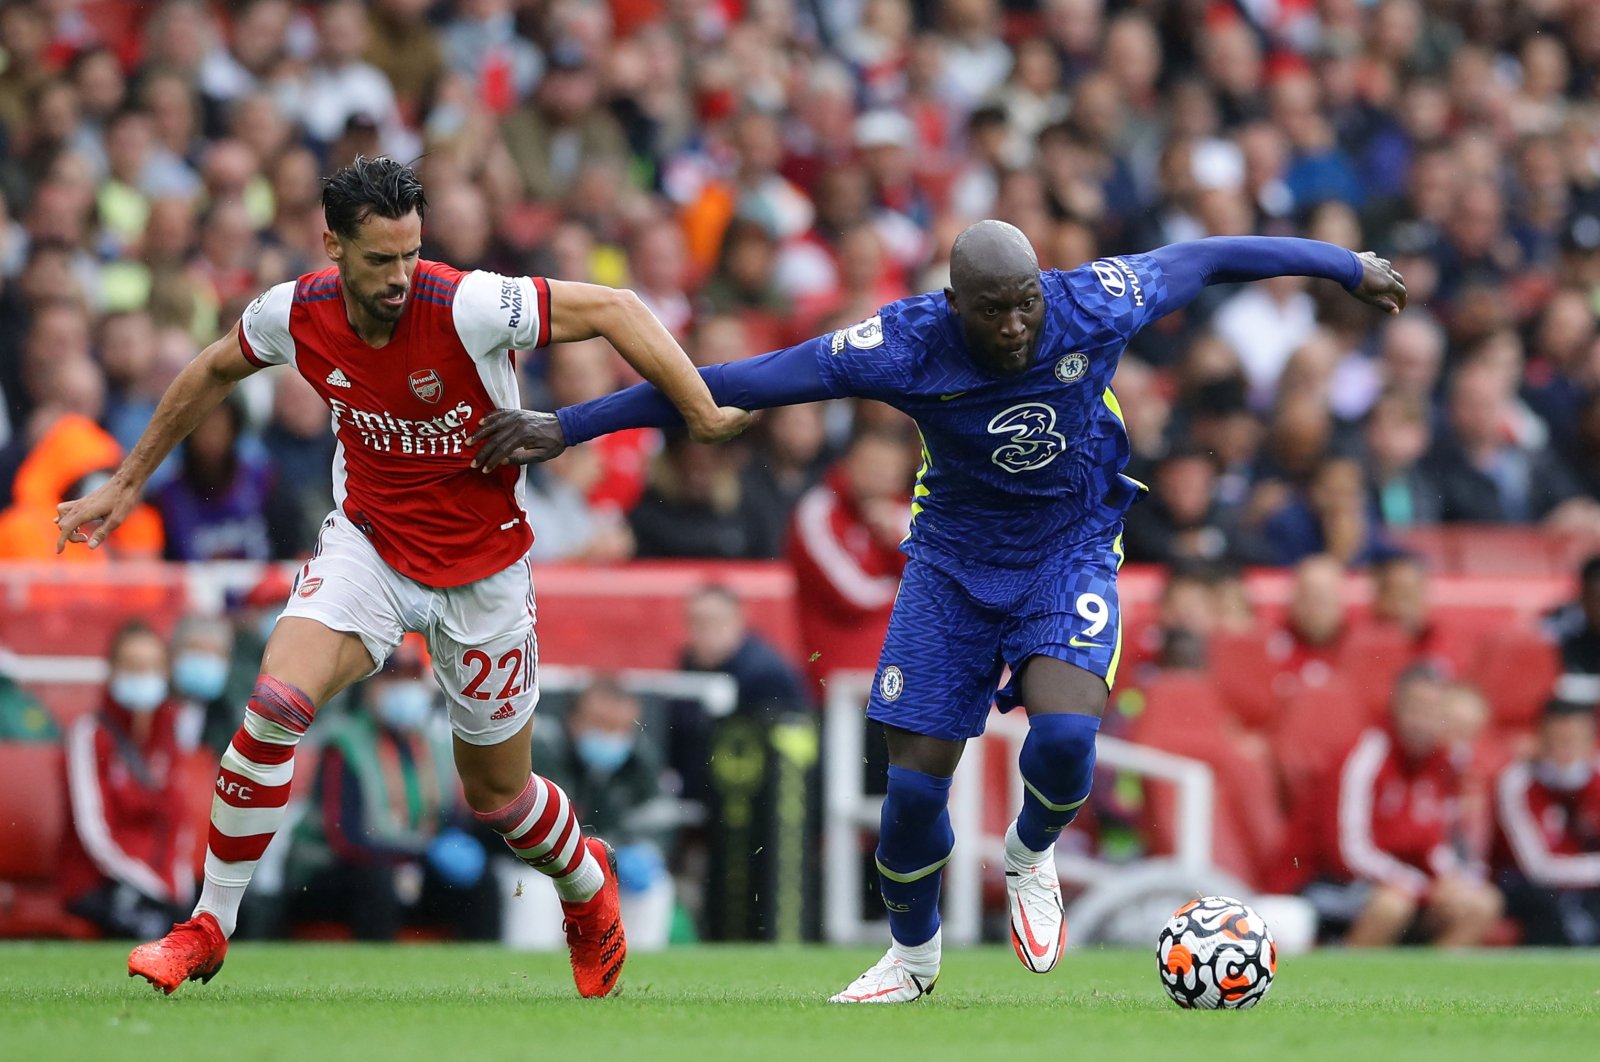 Arsenal&#039;s Pablo Mari in action with Chelsea&#039;s Romelu Lukaku during a Premier League match at Emirates Stadium, London, England, Aug. 22, 2021. (Reuters Photo)